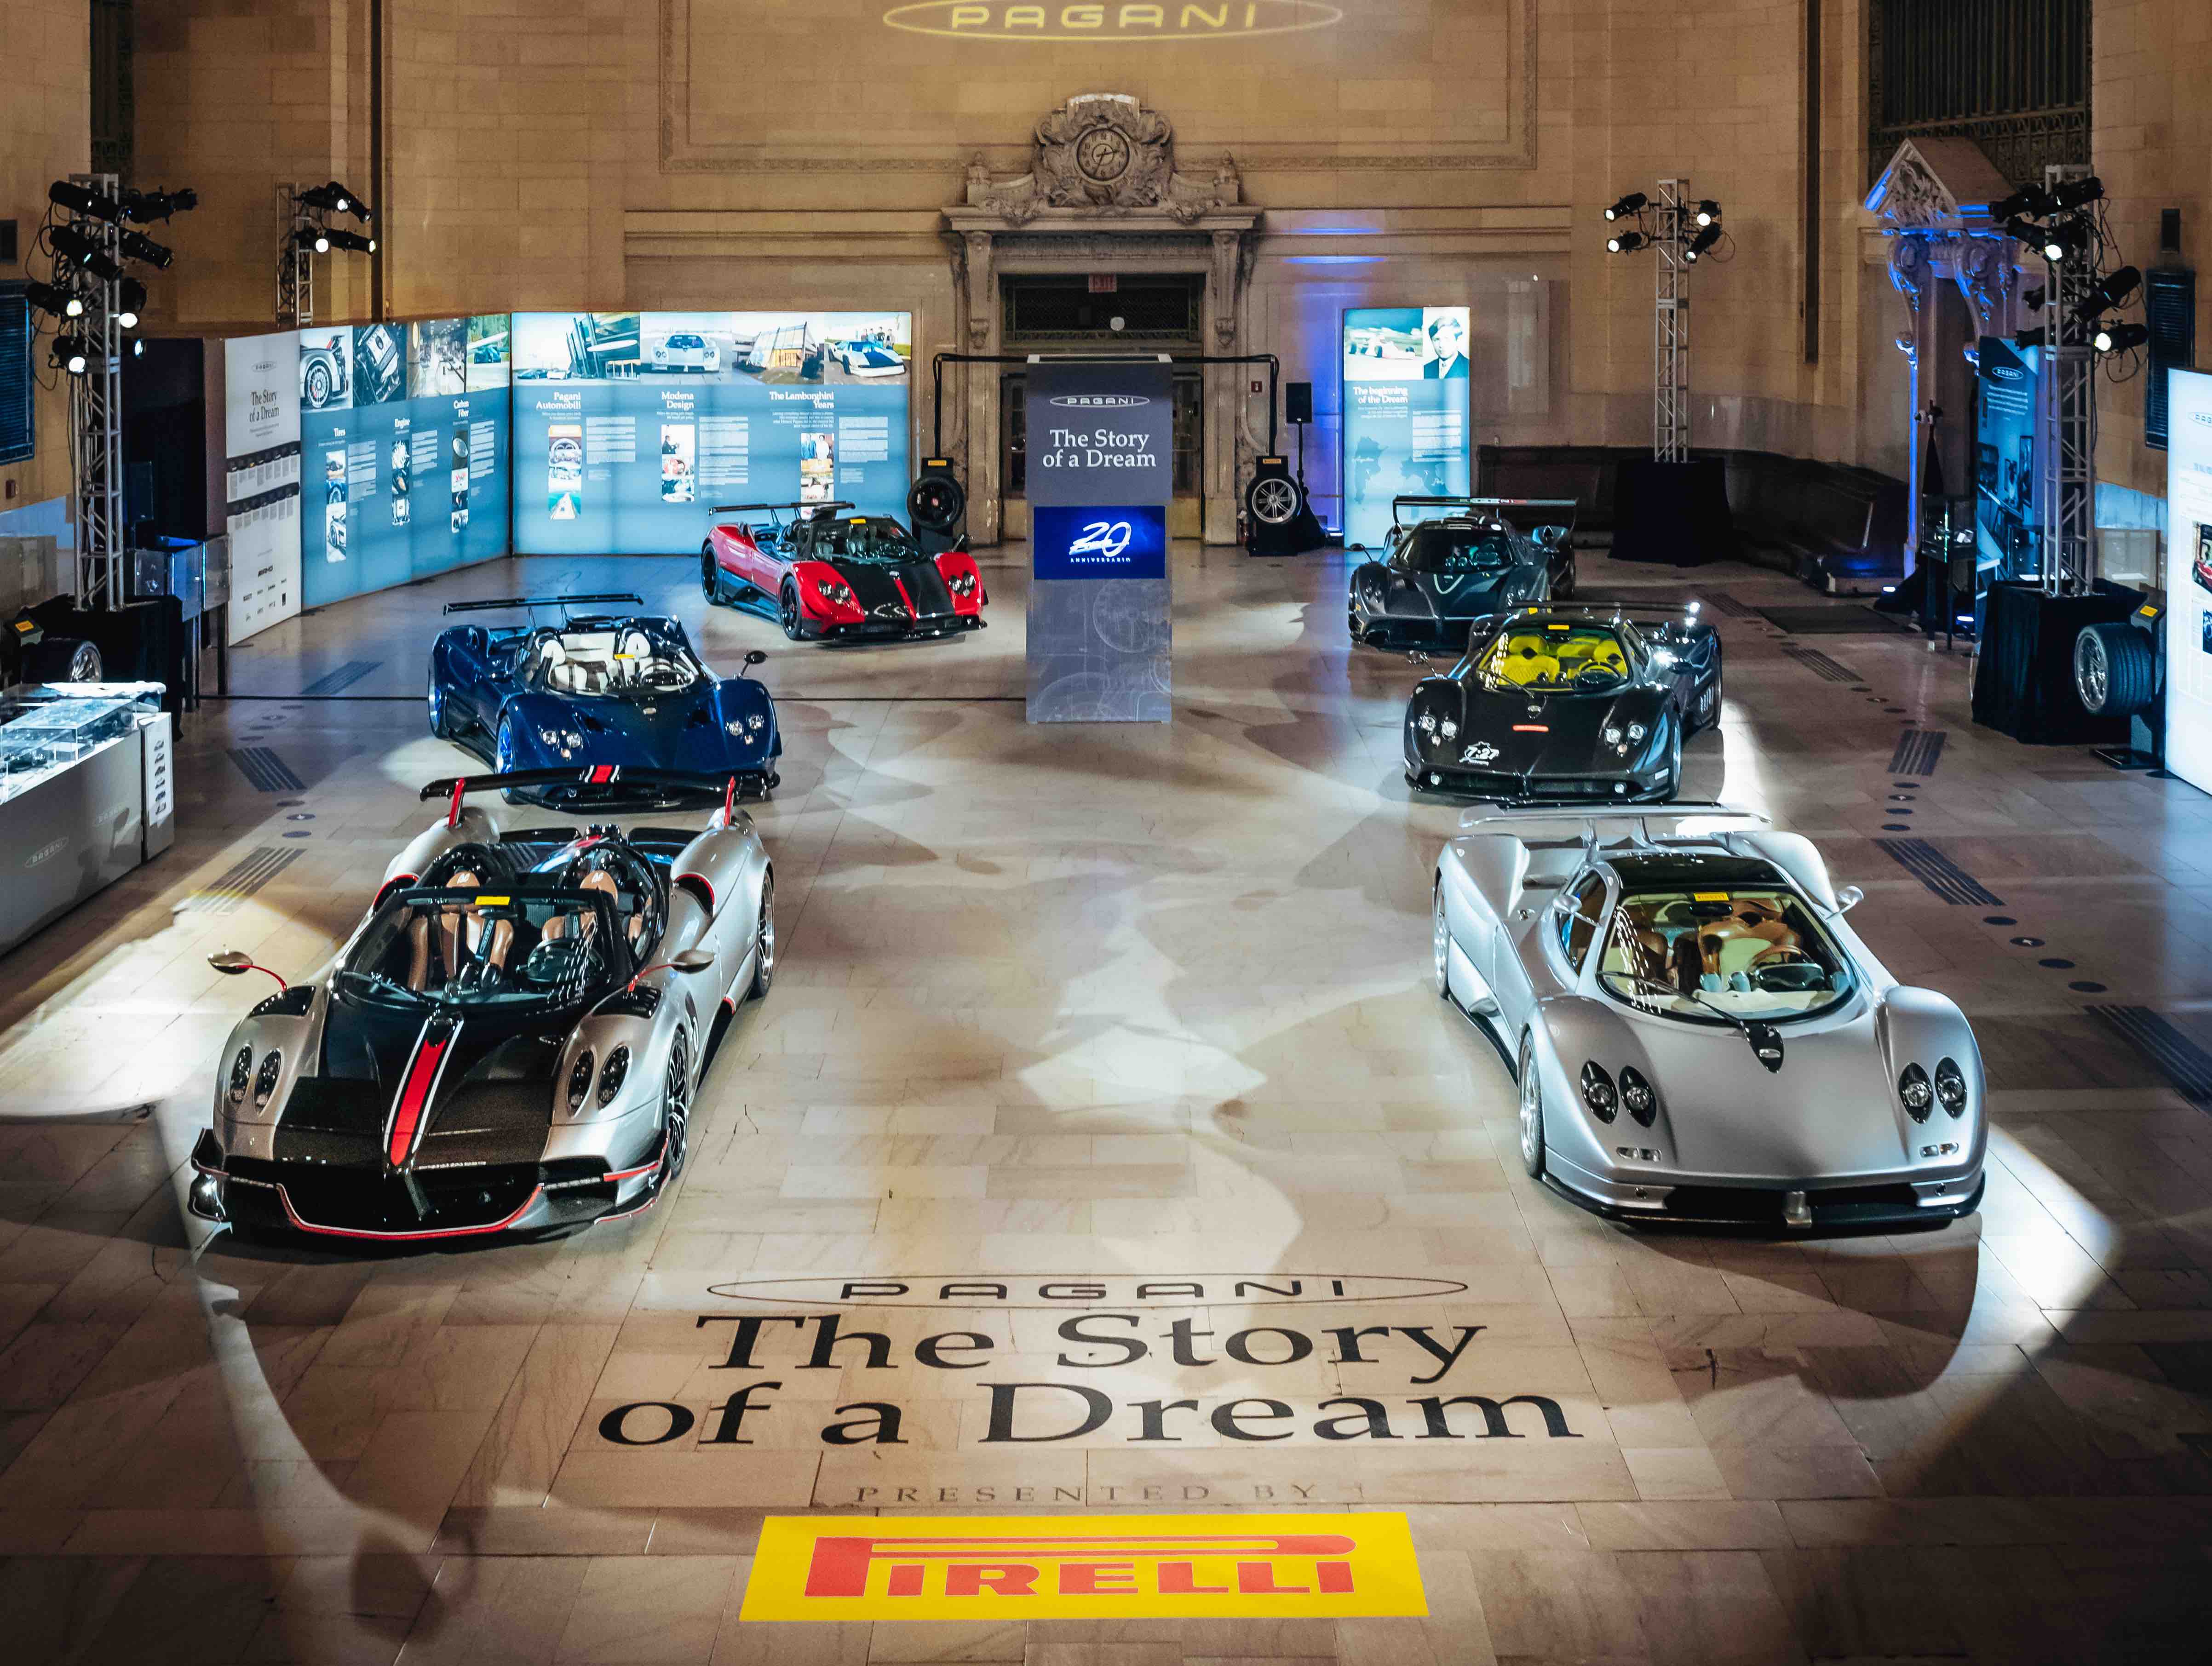 Here’s Why There’s $27M Worth Of Pagani Parked In Grand Central Station